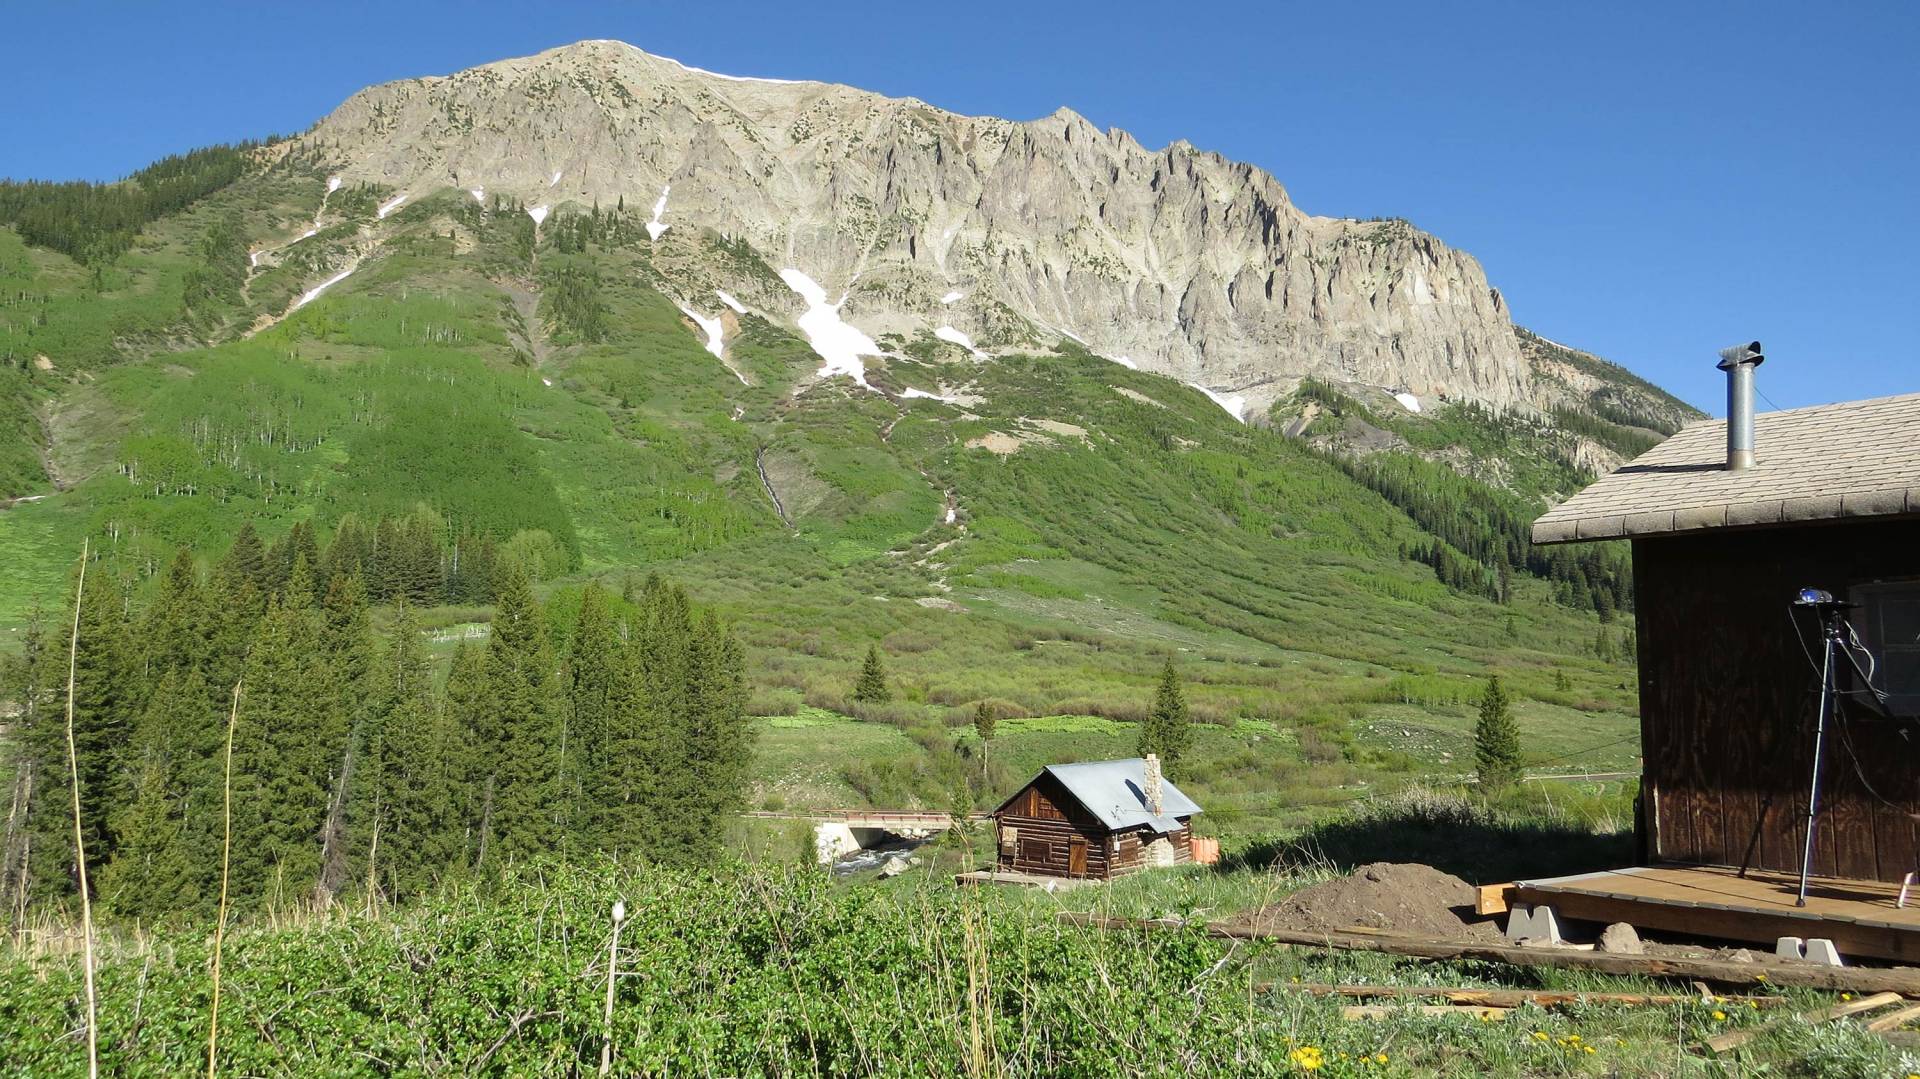 Cabins in at the feet of Rocky Mountains